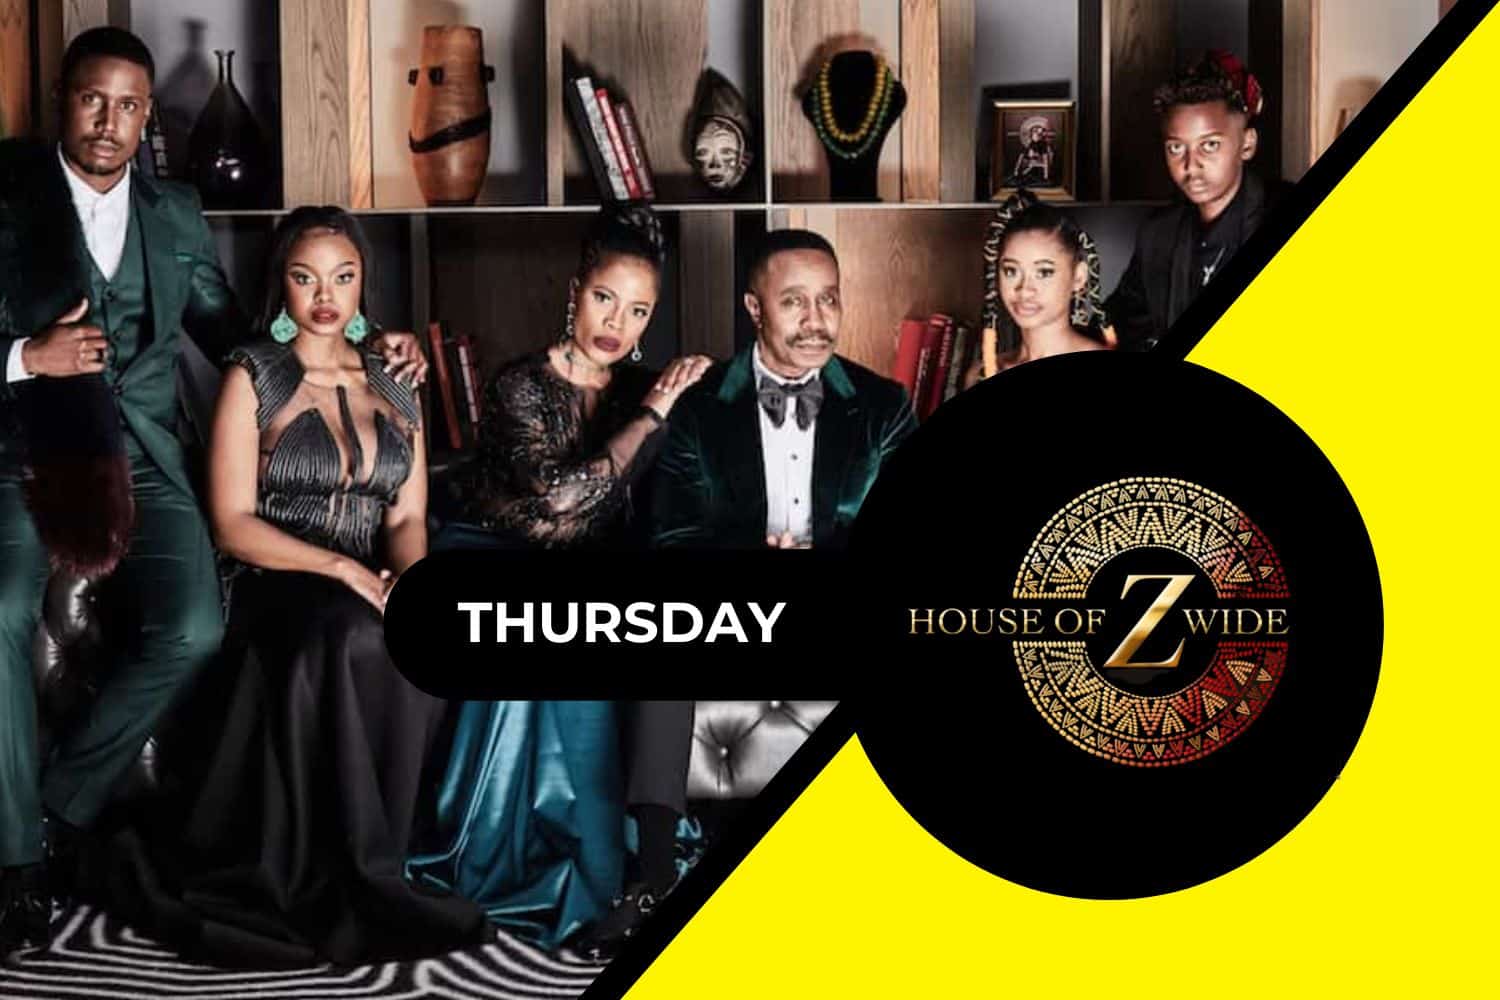 On today's episode of House of Zwide Thursday.